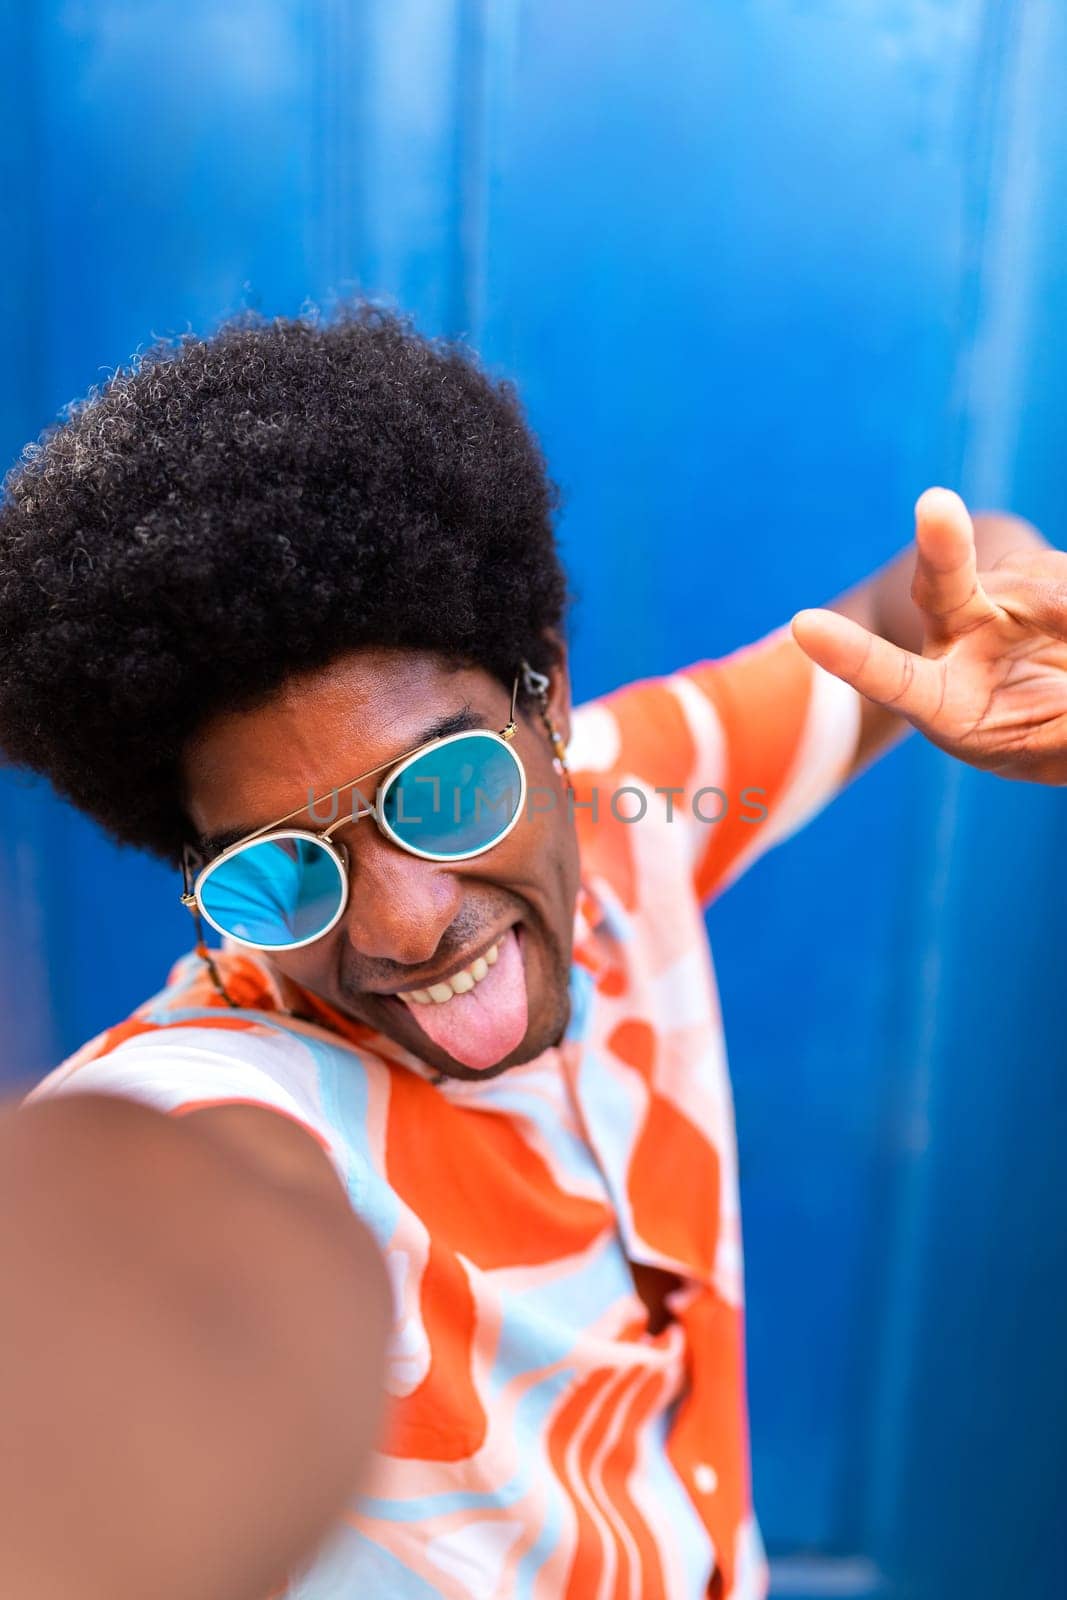 Young African American man with afro hairstyle and sunglasses makes silly faces while taking a selfie with mobile phone. Lifestyle concept.